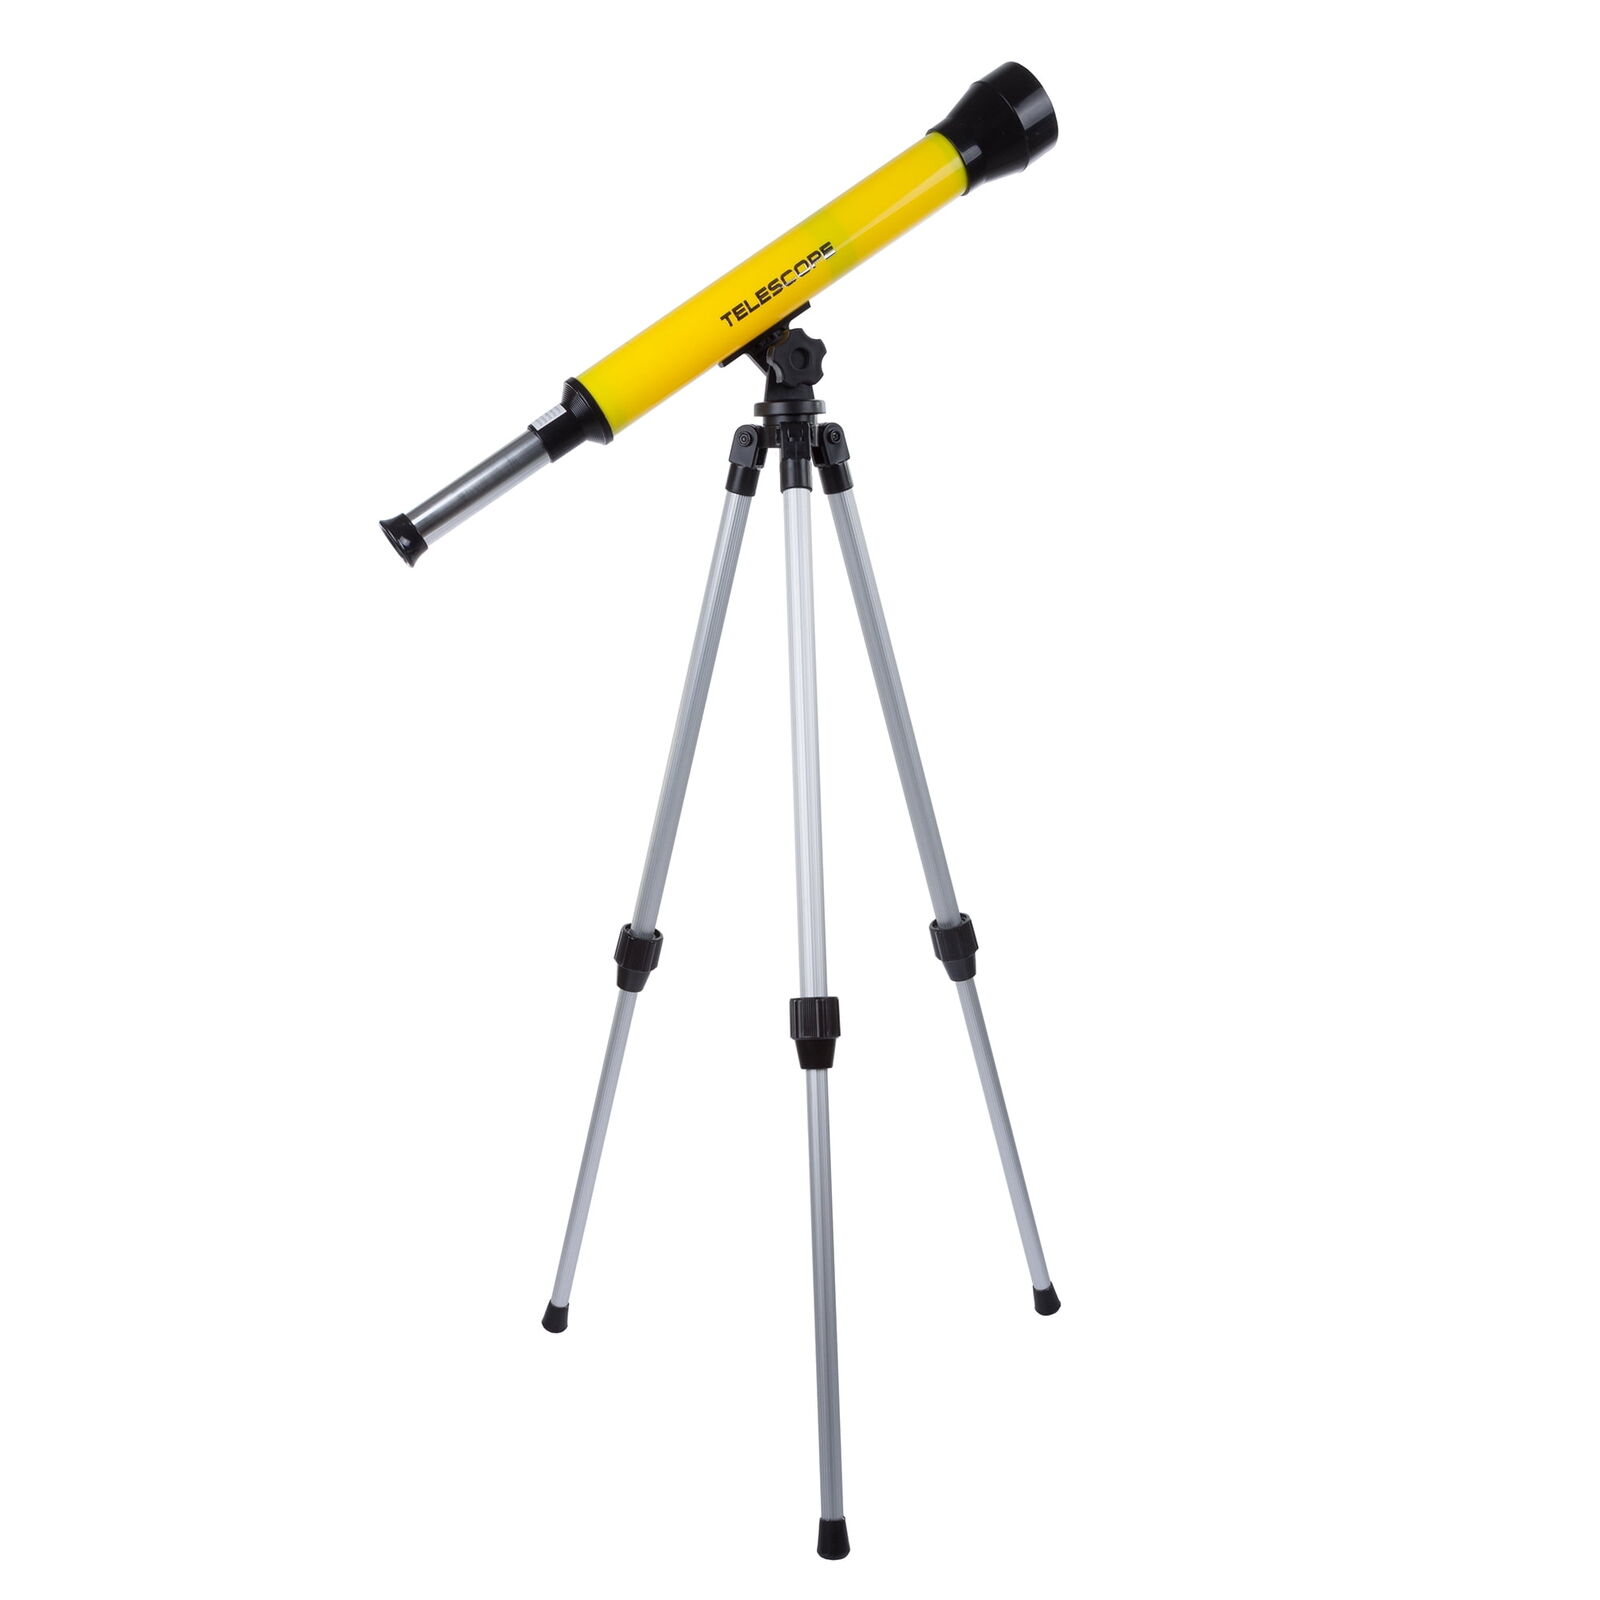 Telescope for Kids with Tripod - 40mm Beginner Telescope with Adjustable 